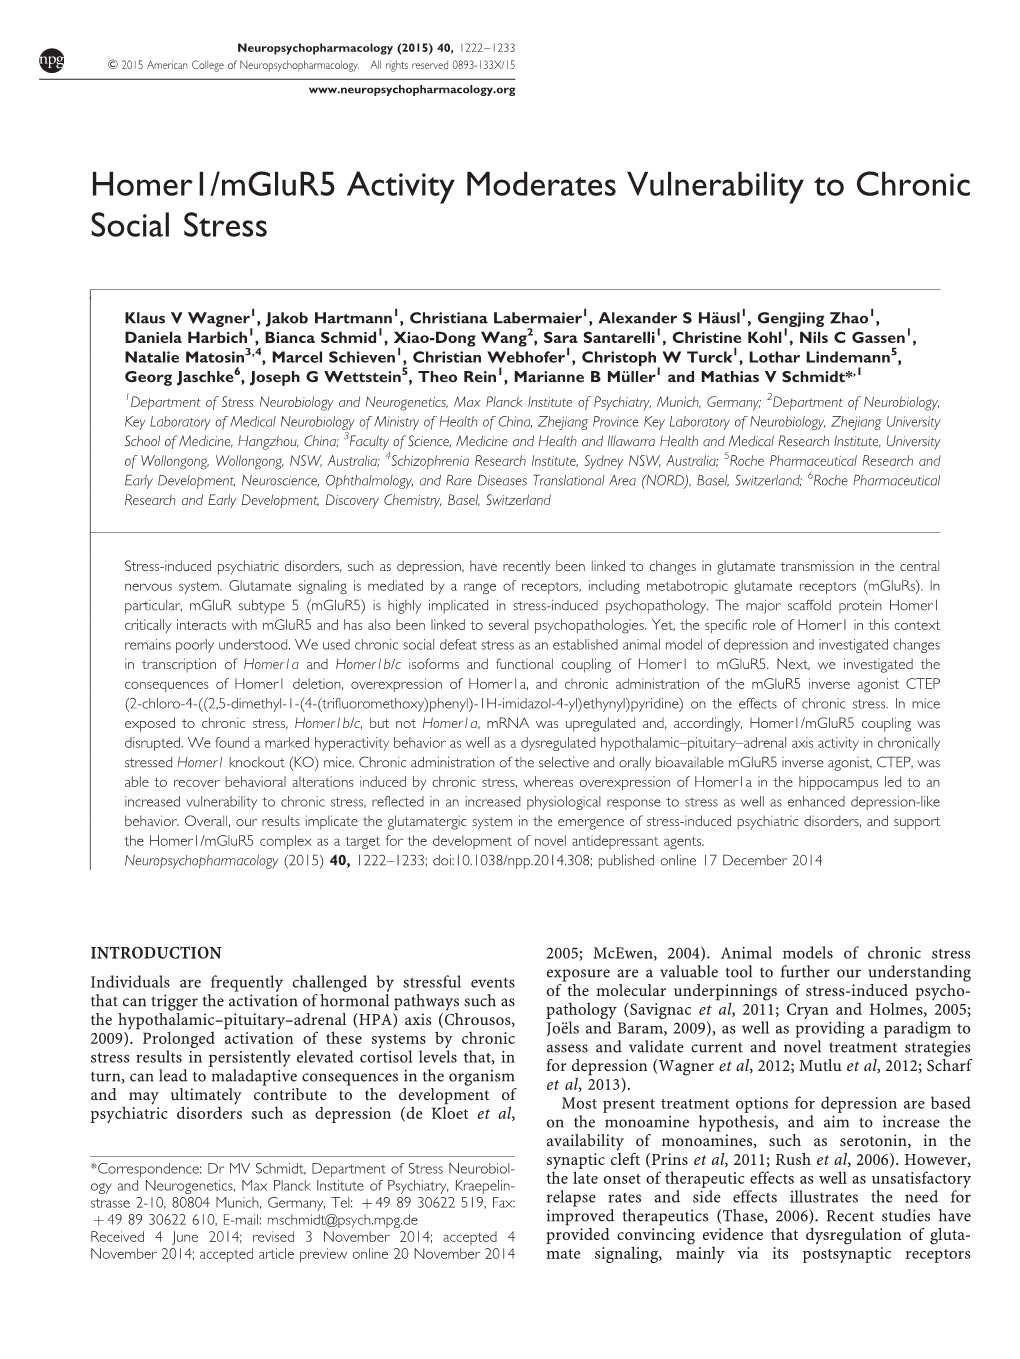 Mglur5 Activity Moderates Vulnerability to Chronic Social Stress